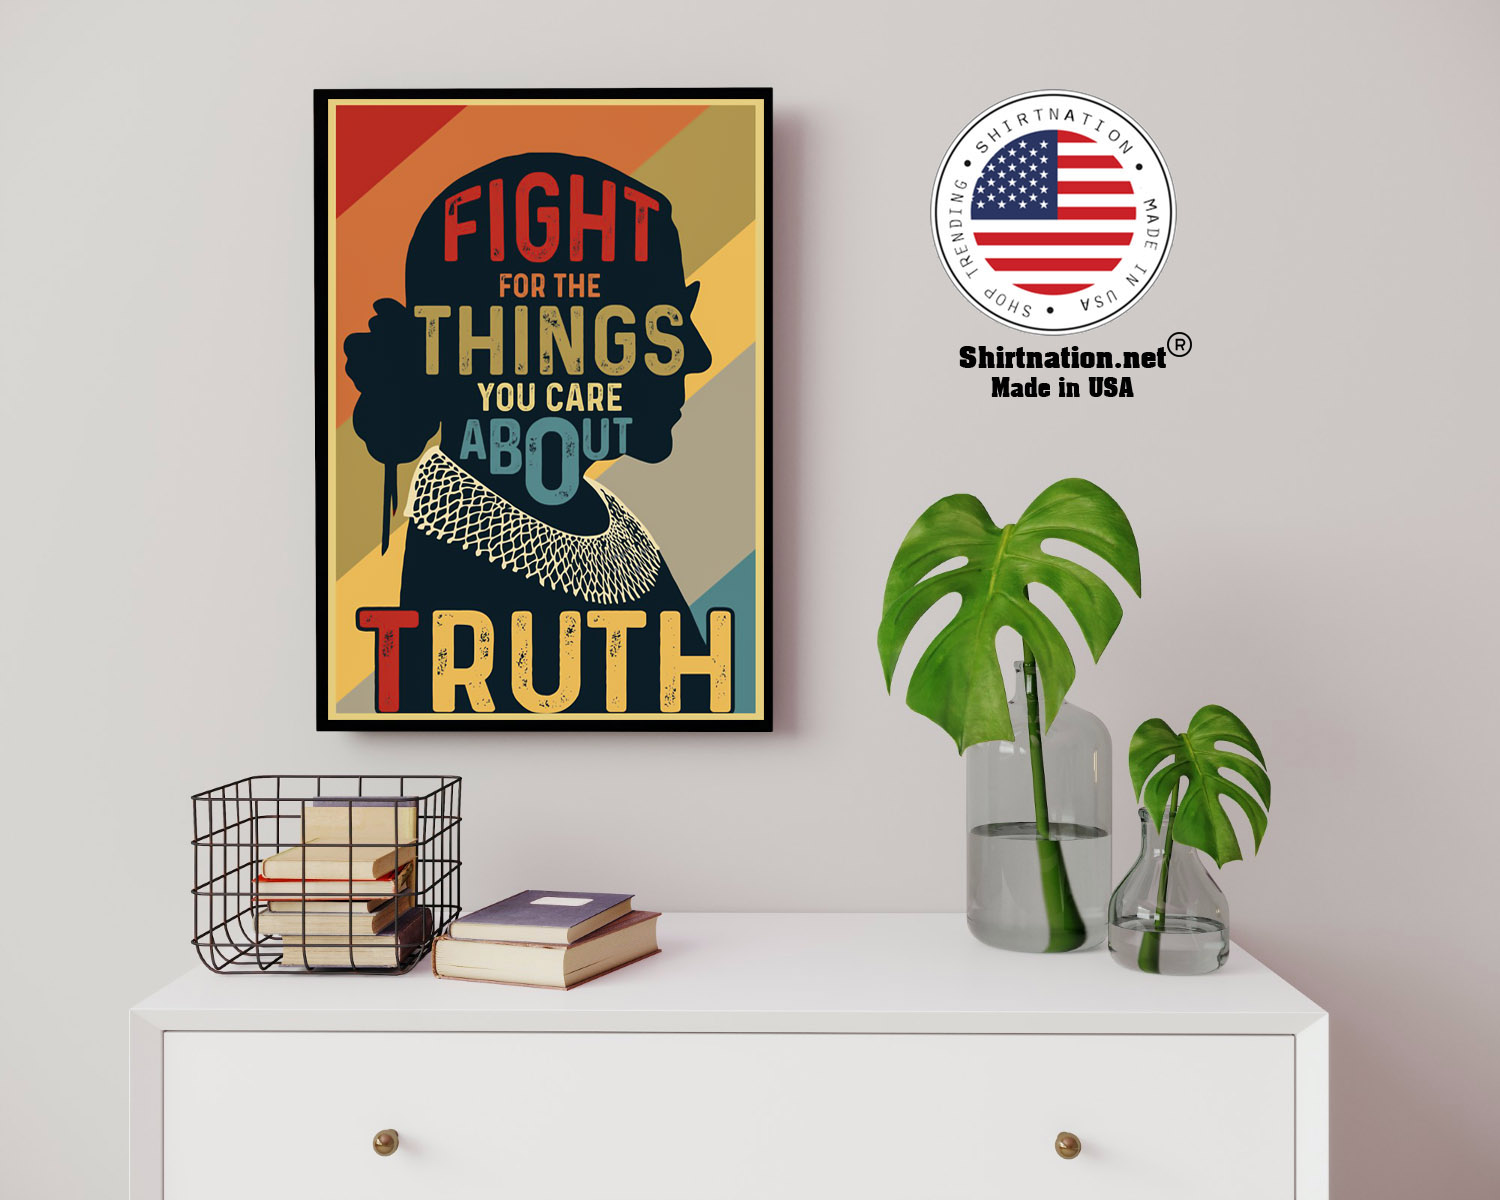 Ruth Fight for the things you care about truth poster 14